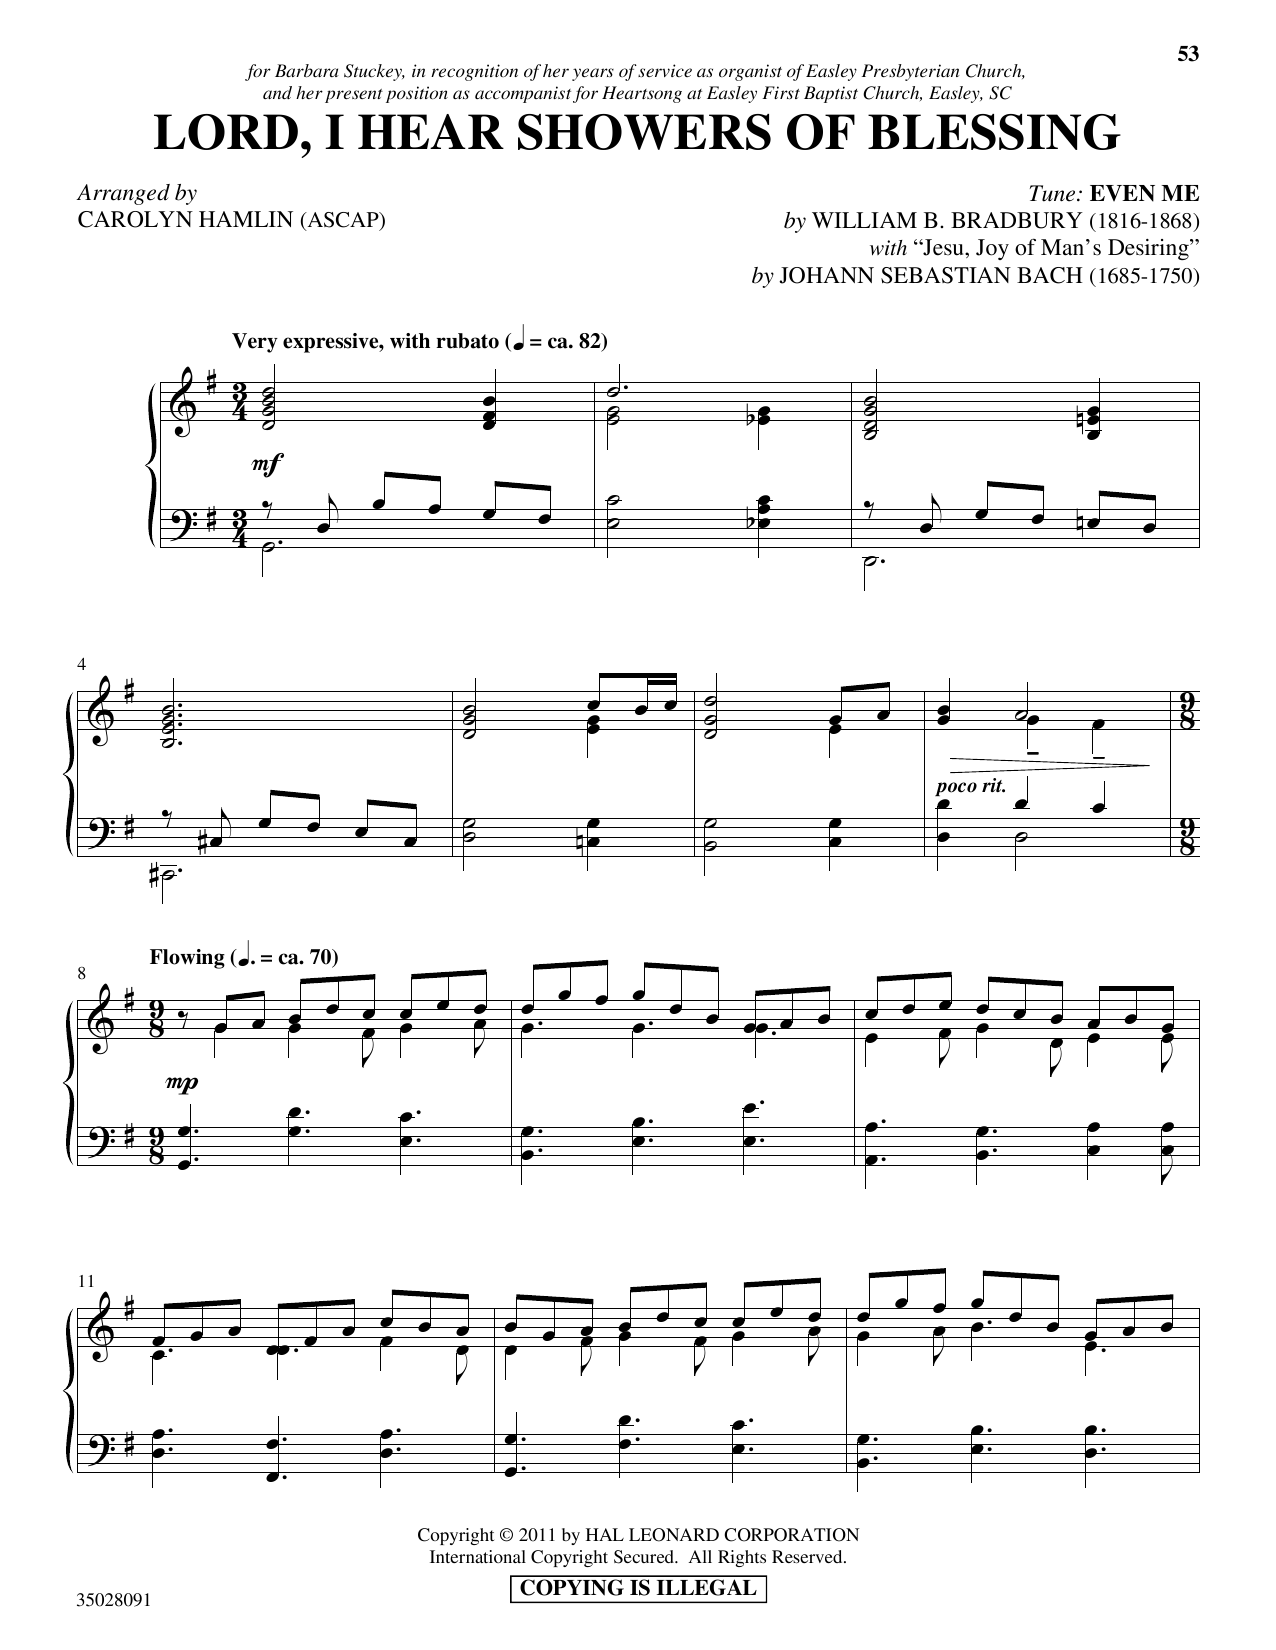 Download Carolyn Hamlin Lord, I Hear Showers Of Blessing (with Sheet Music